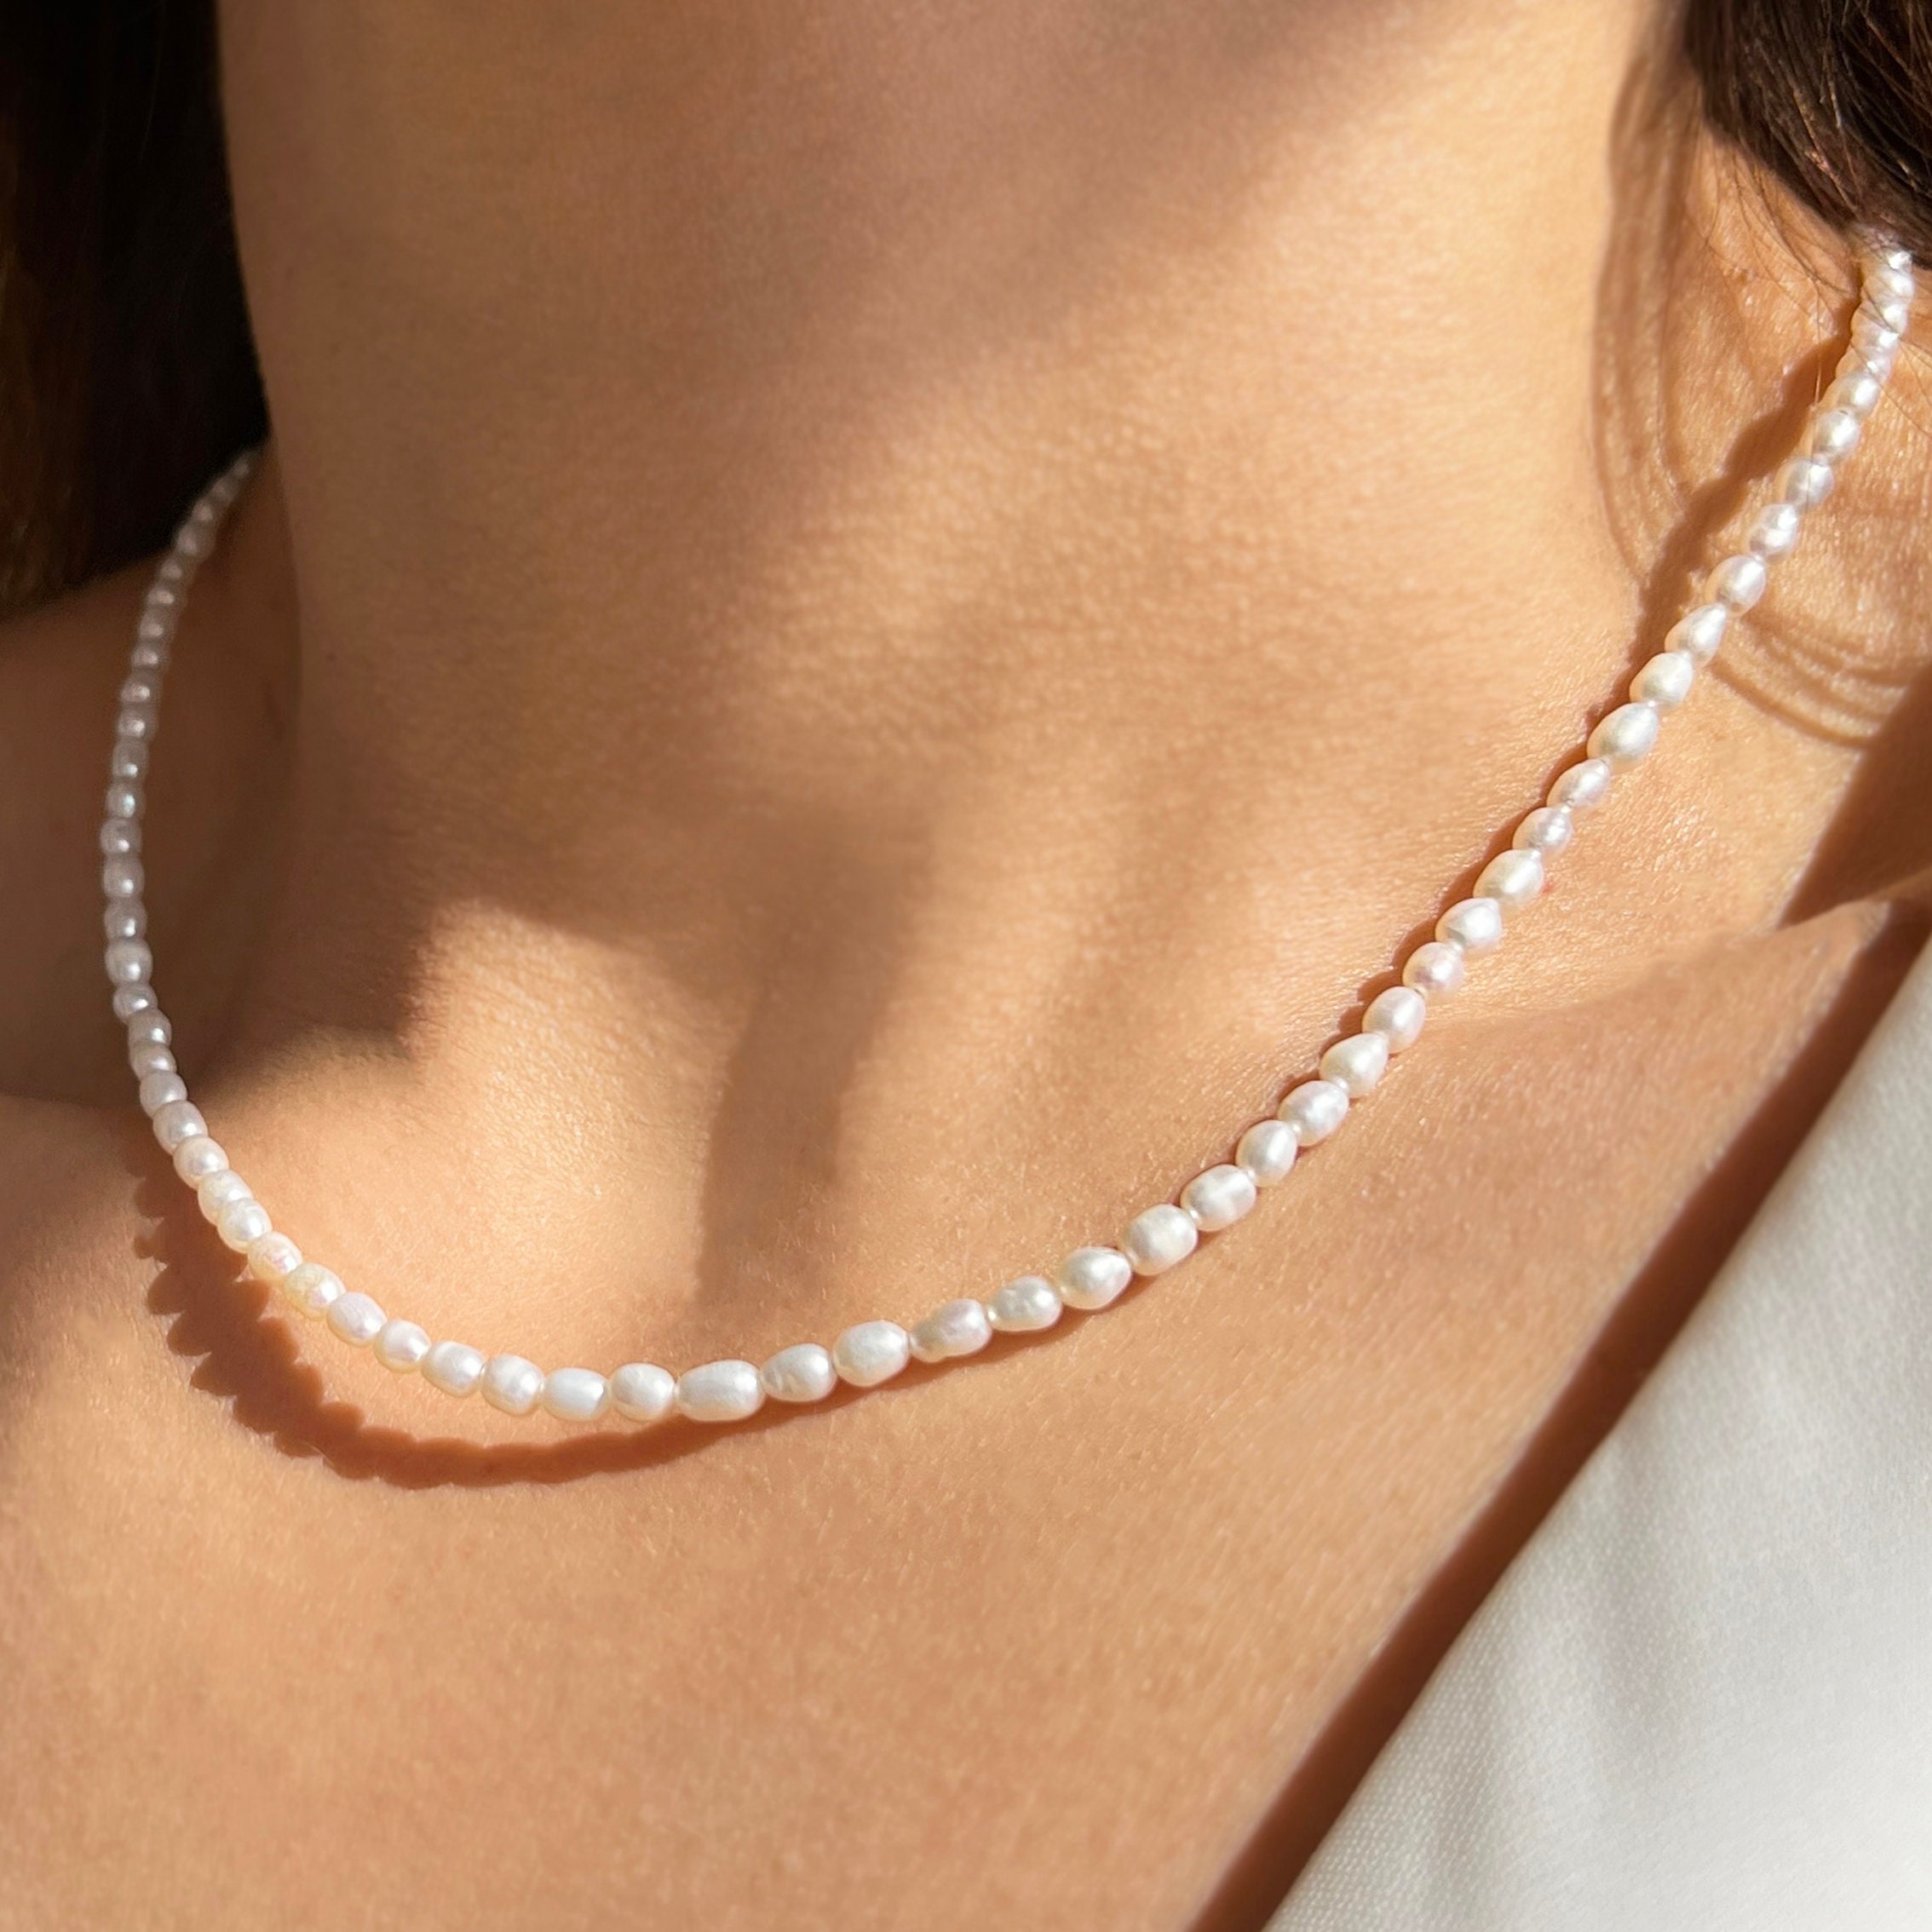 MelJoy Creations Jewelry Dainty Pearl Choker Necklace, Choice of Length and  India | Ubuy